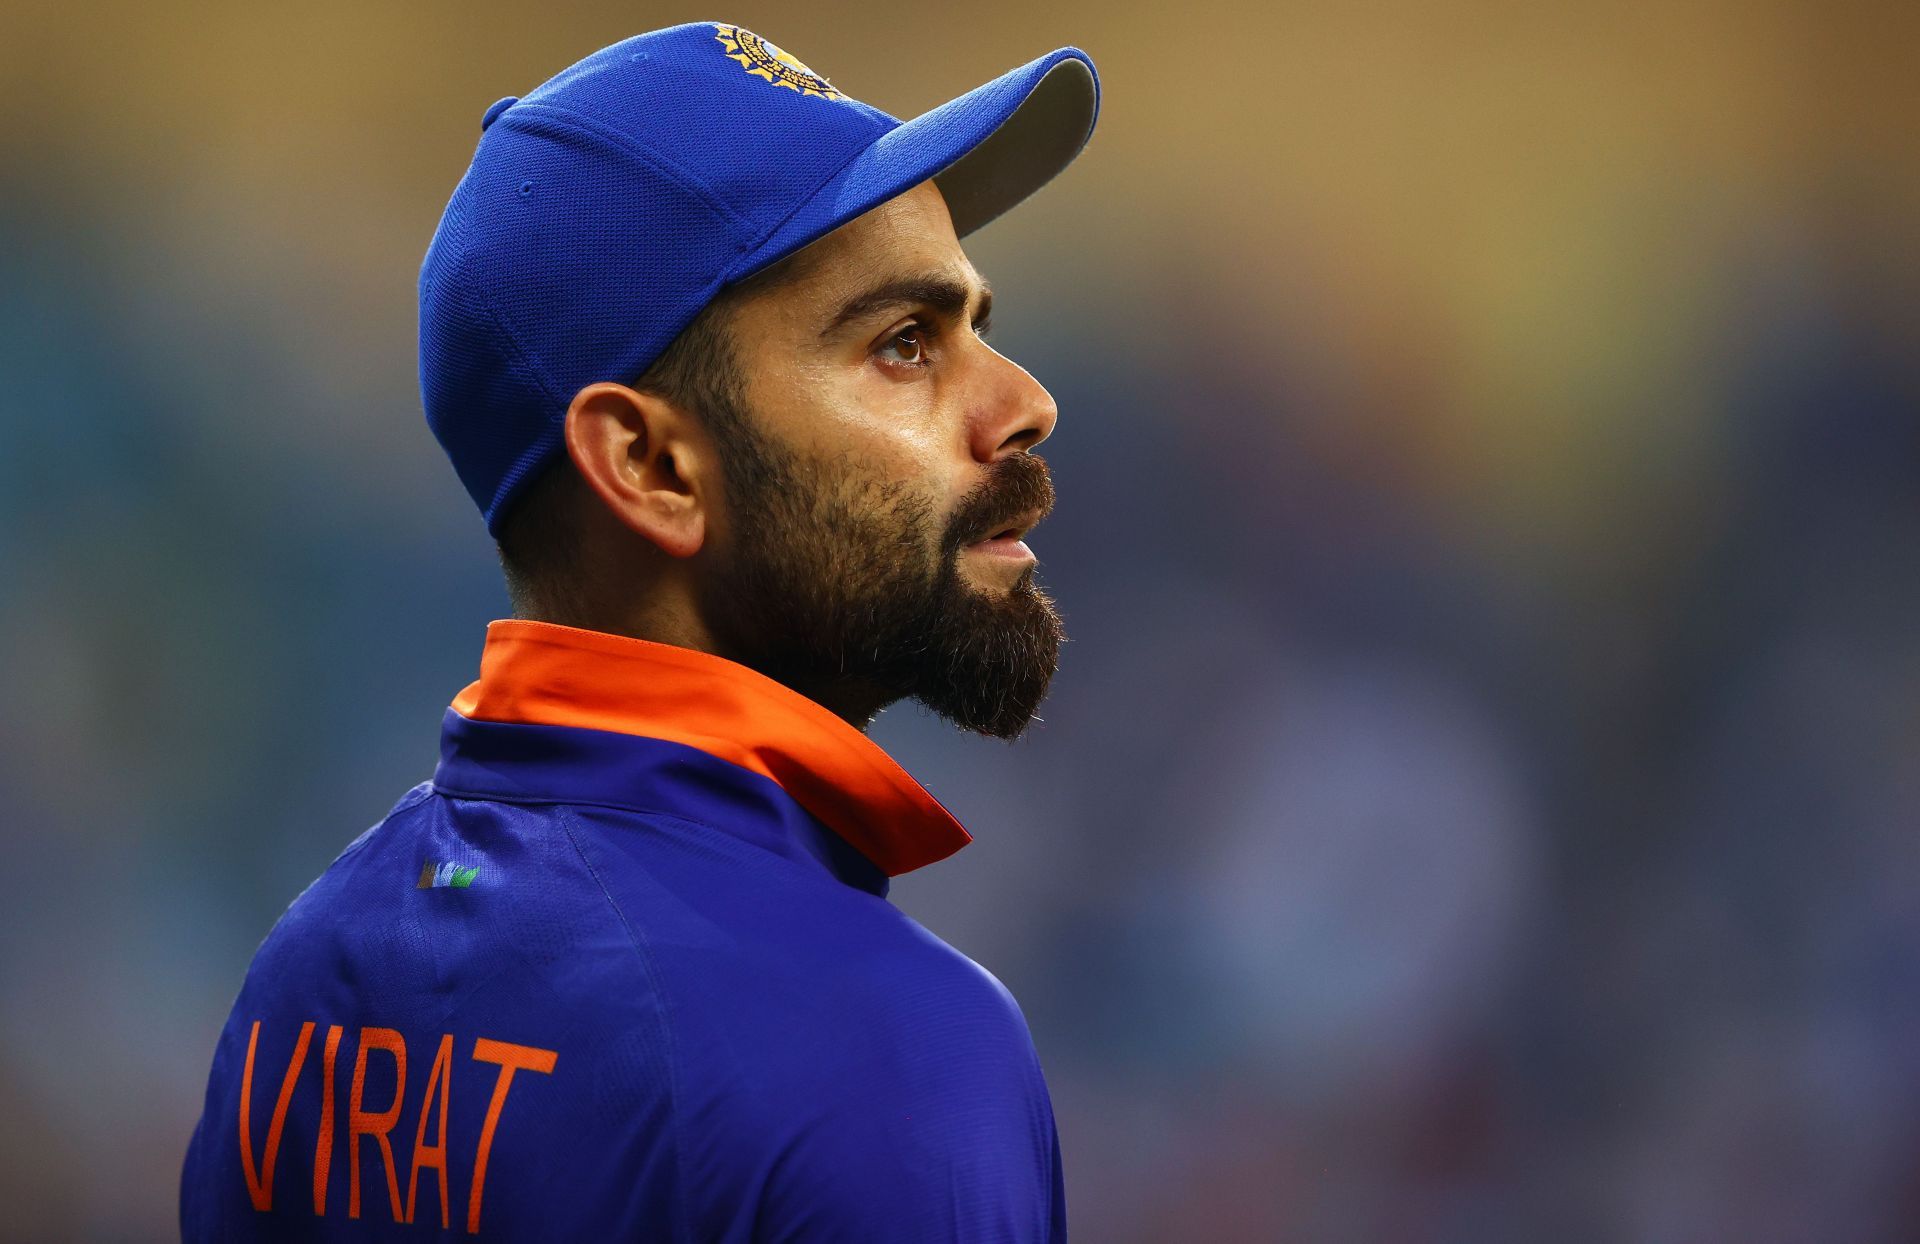 Virat Kohli will lead India for the last time in T20I cricket against Namibia